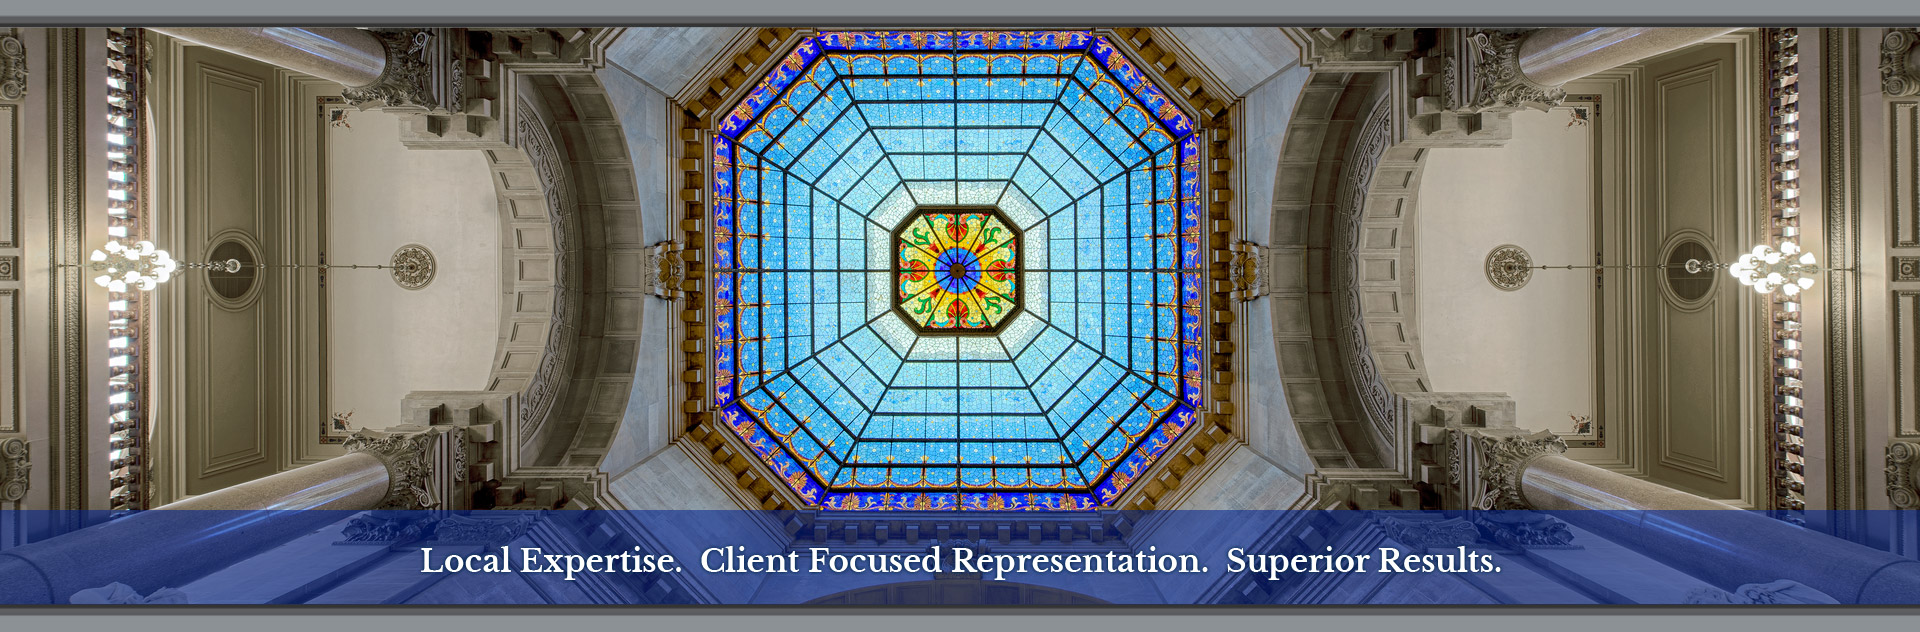 Professional Legal Services for Northwest Indiana